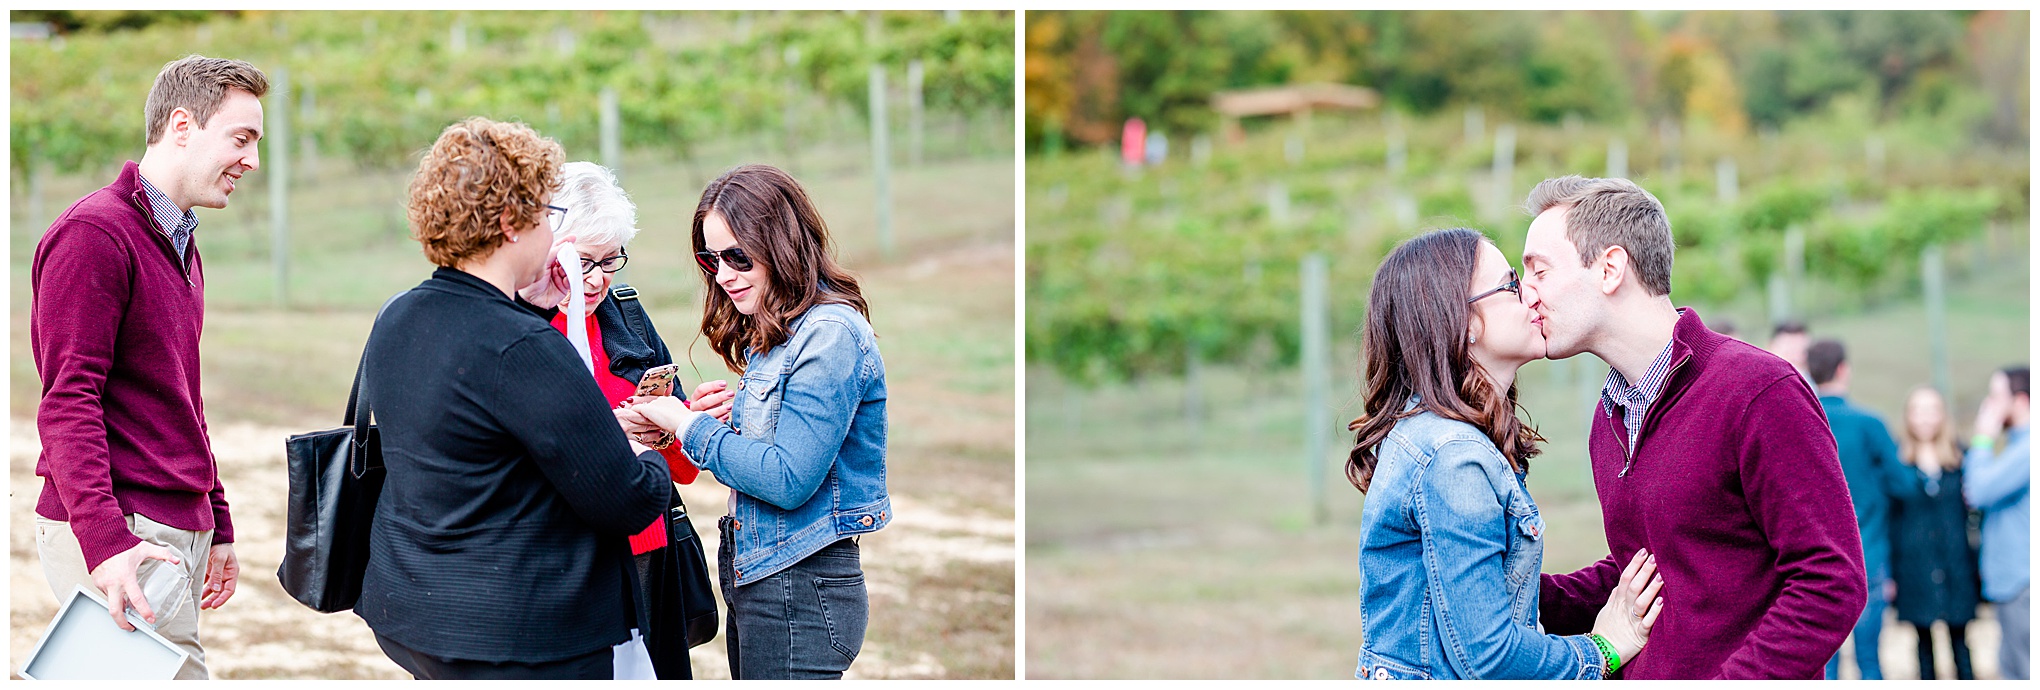 Running Hare Vineyard surprise proposal, Maryland winery, Maryland proposal photographer, D.C. proposal photographer, Maryland engagement, surprise proposal, Running Hare Vineyard proposal, Running Hare Vineyard, D.C. wedding photographer, Rachel E.H. Photography, autumn proposal, autumn surprise proposal, engaged woman